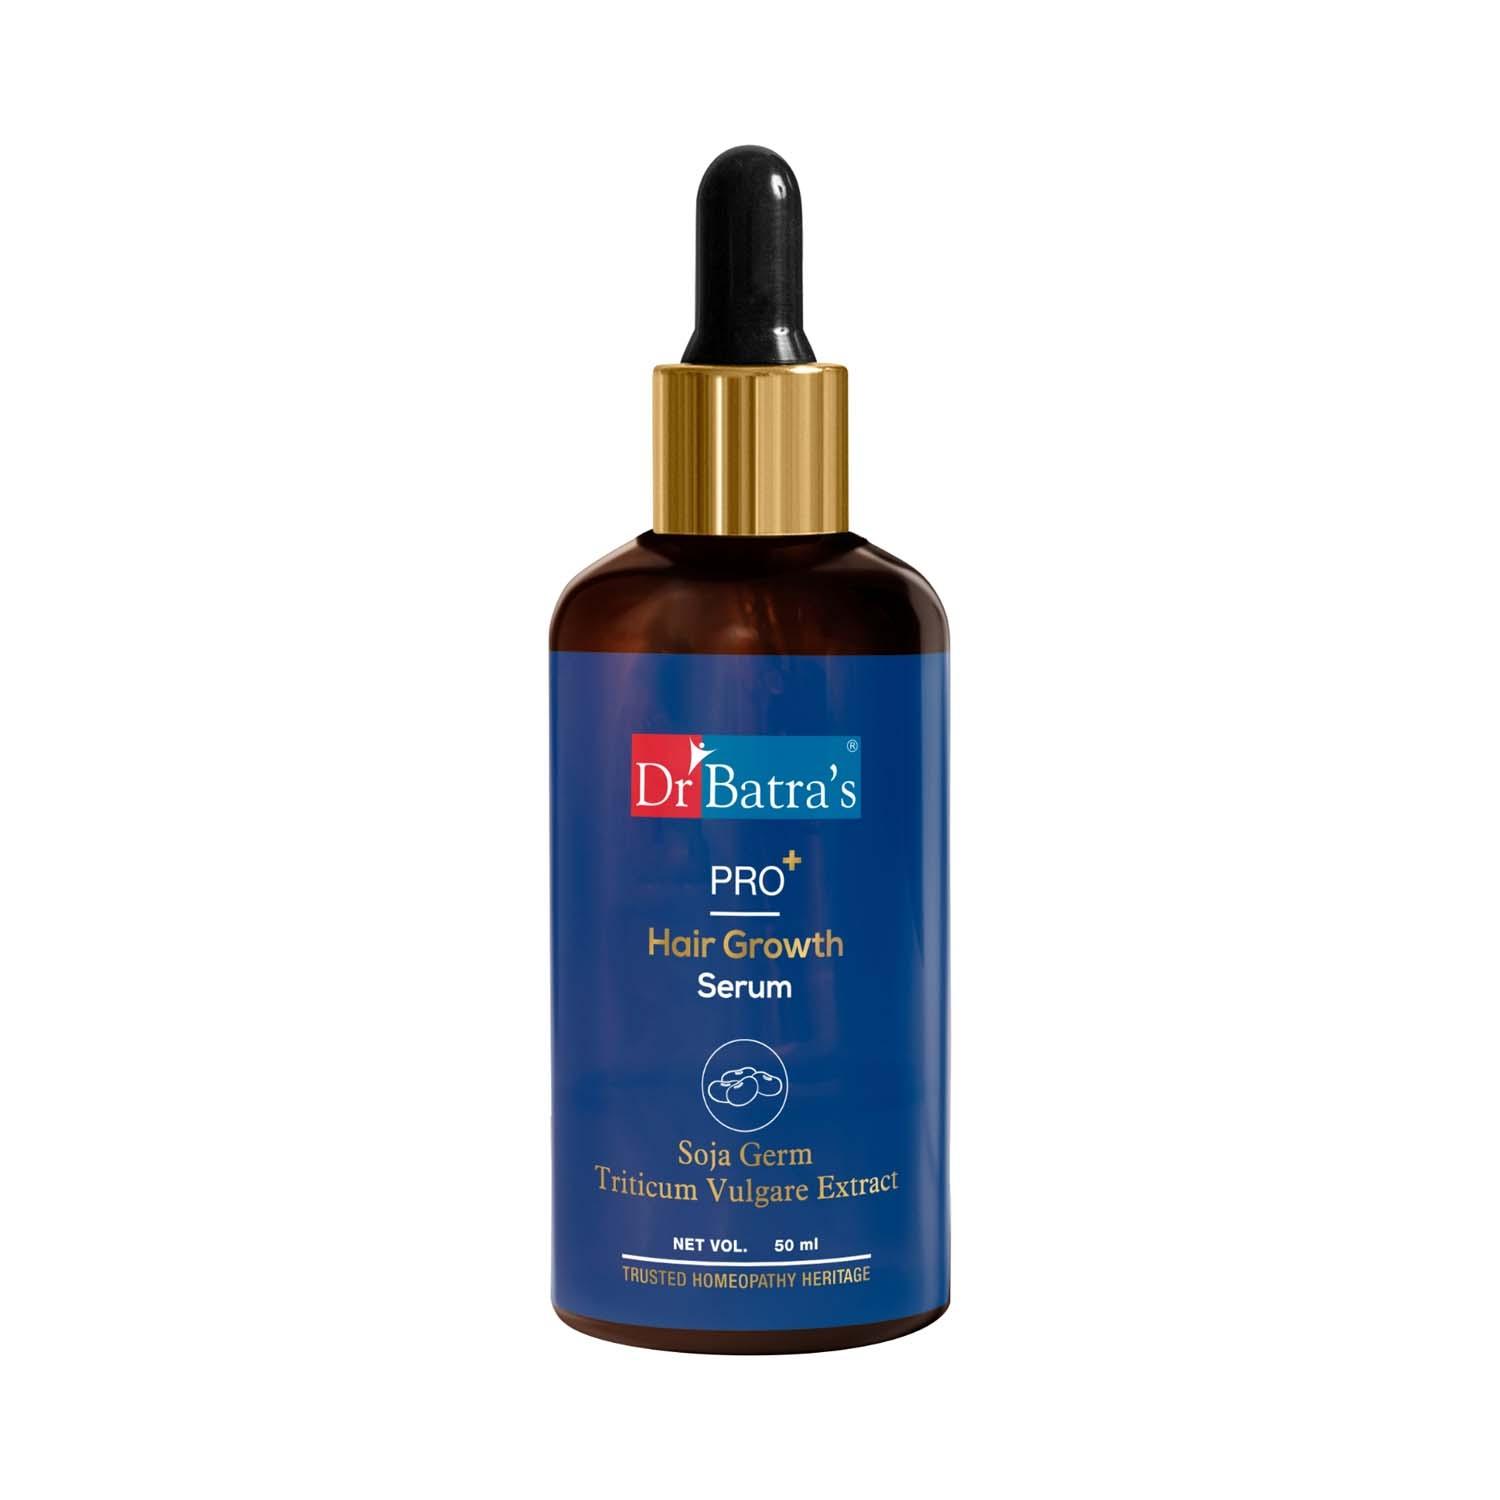 dr batra's pro hair growth with triticum vulgare extract serum (50ml)